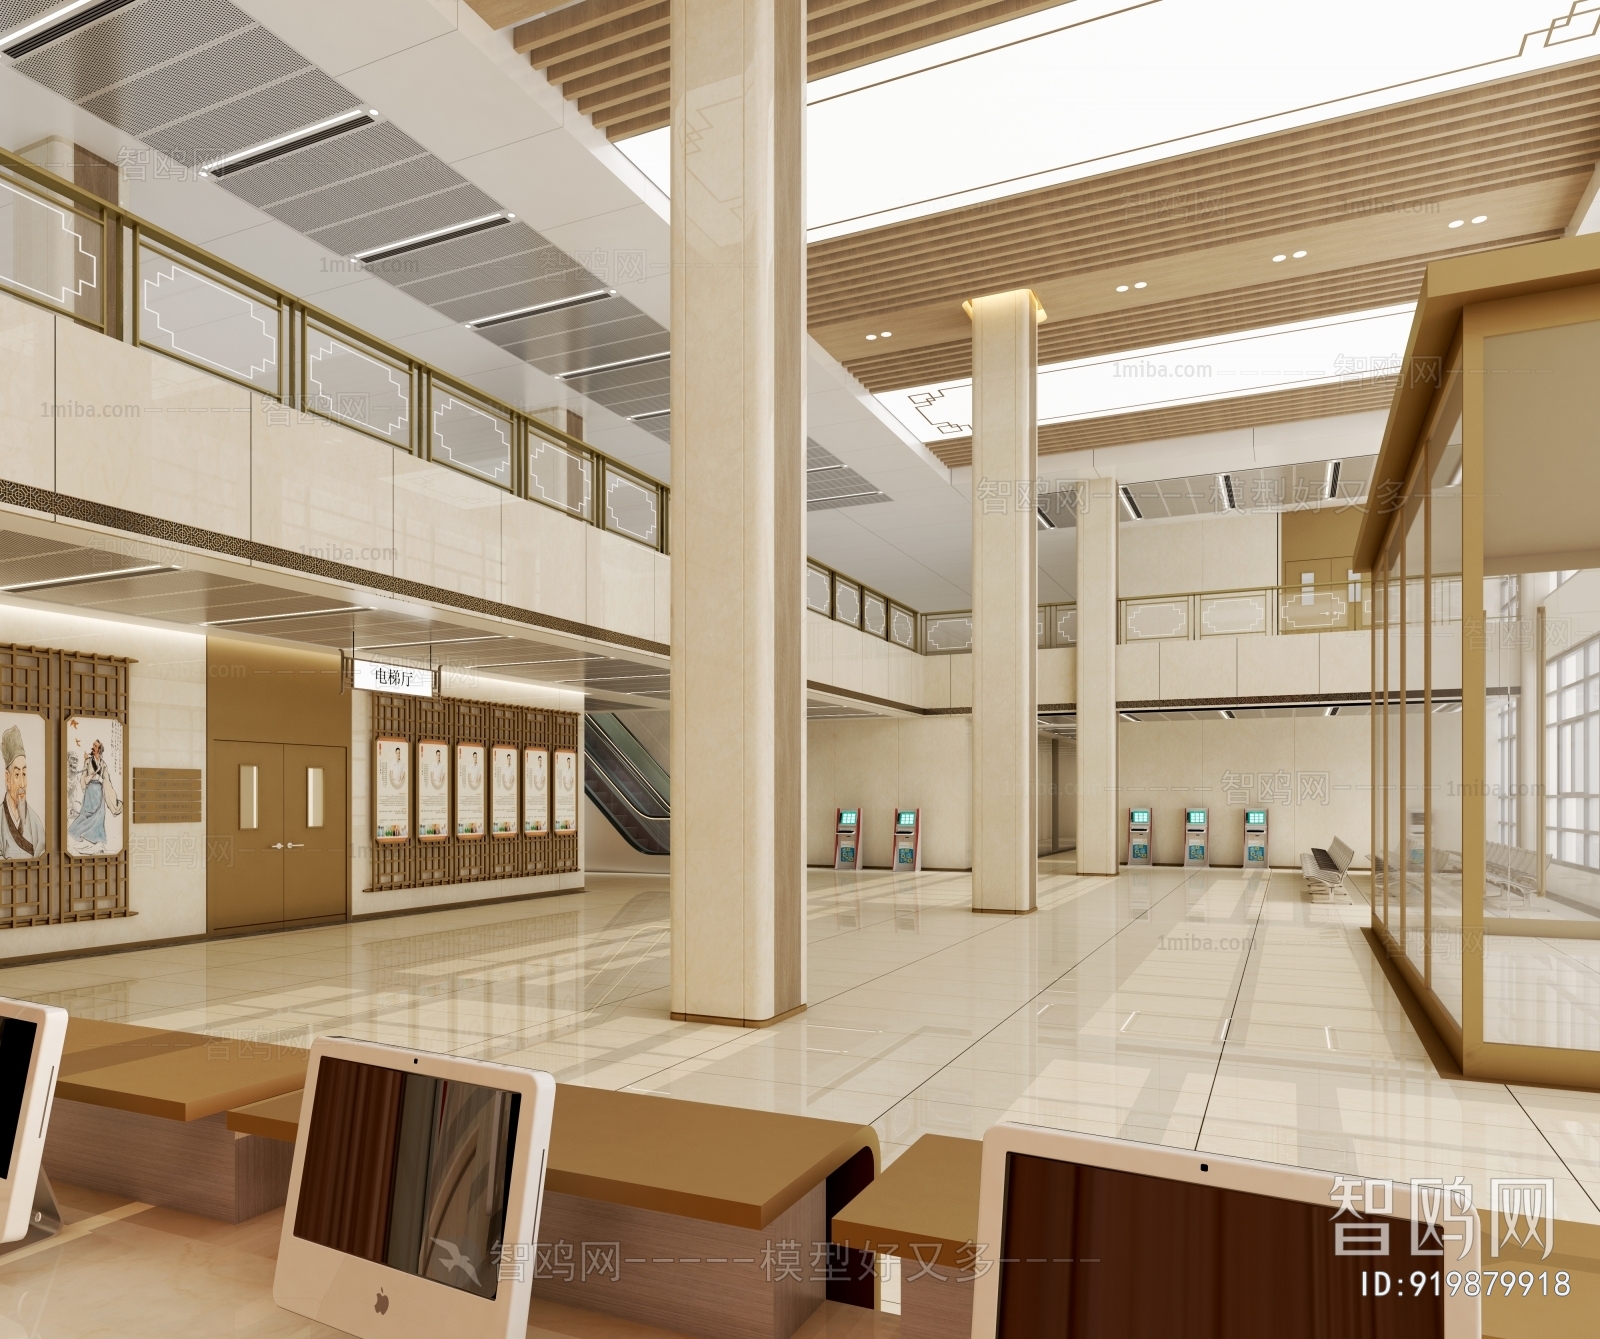 New Chinese Style Hospital Hall